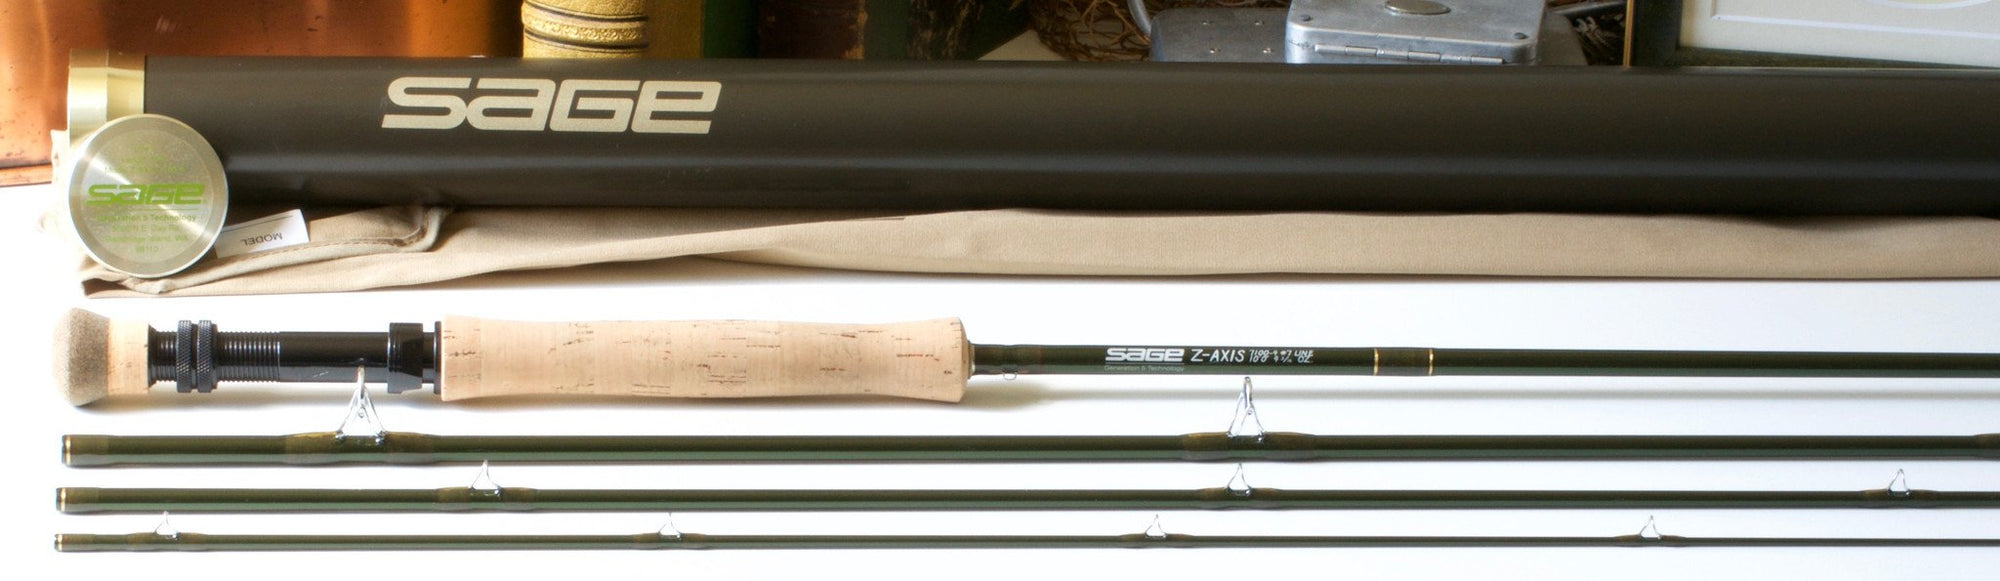 Sage Z-Axis 7100-4 10' #7wt Fly Rod